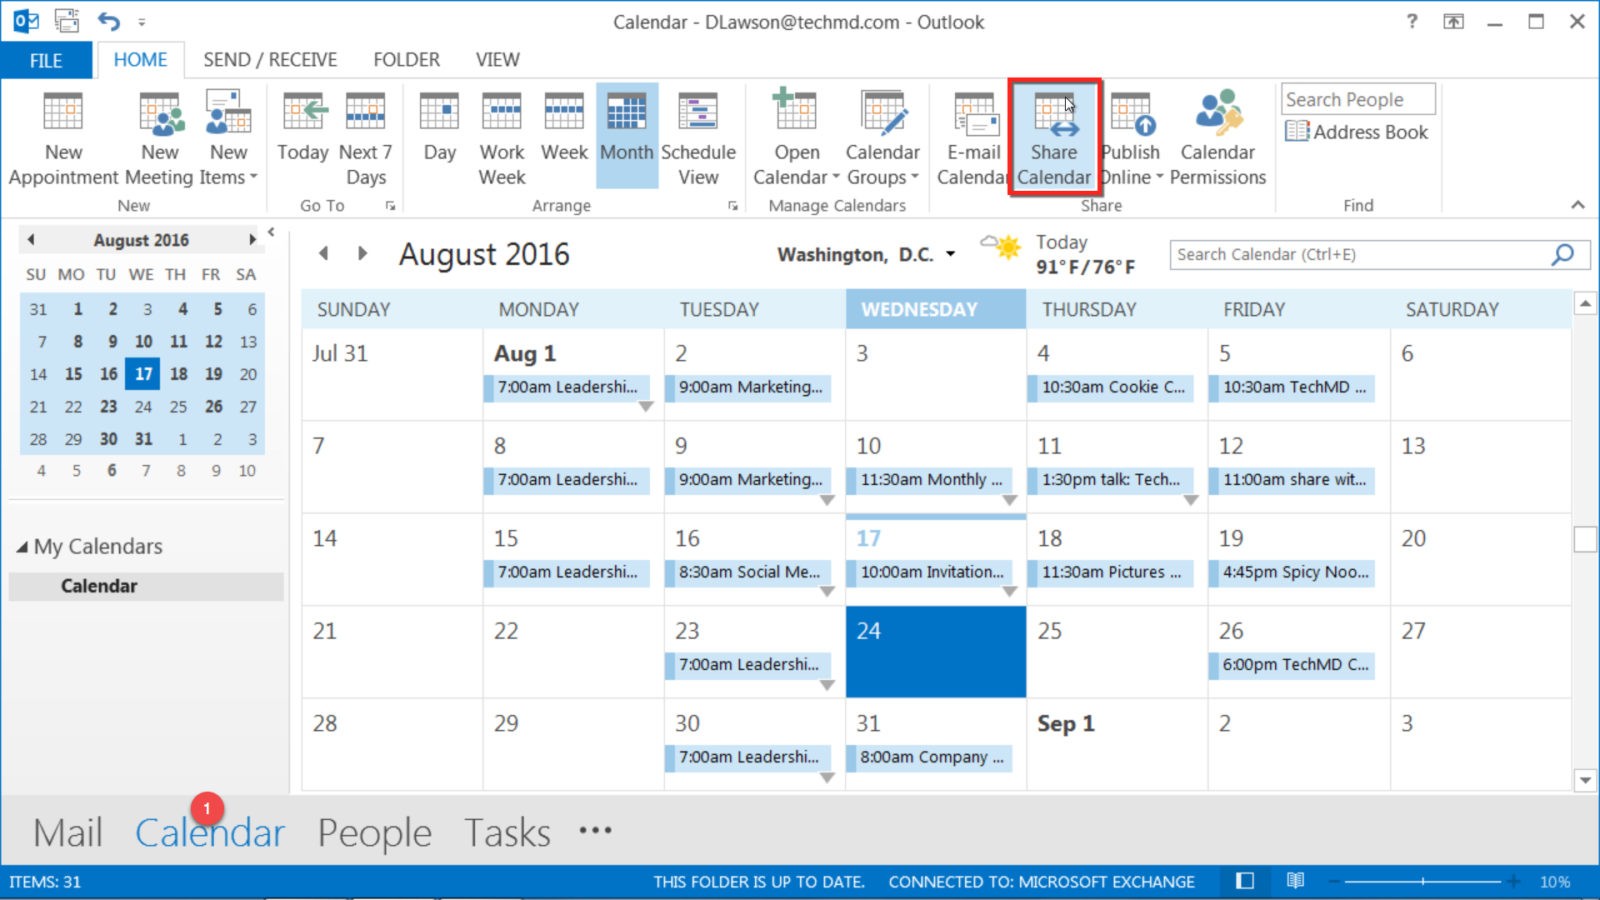 Sharing Calendars in Outlook